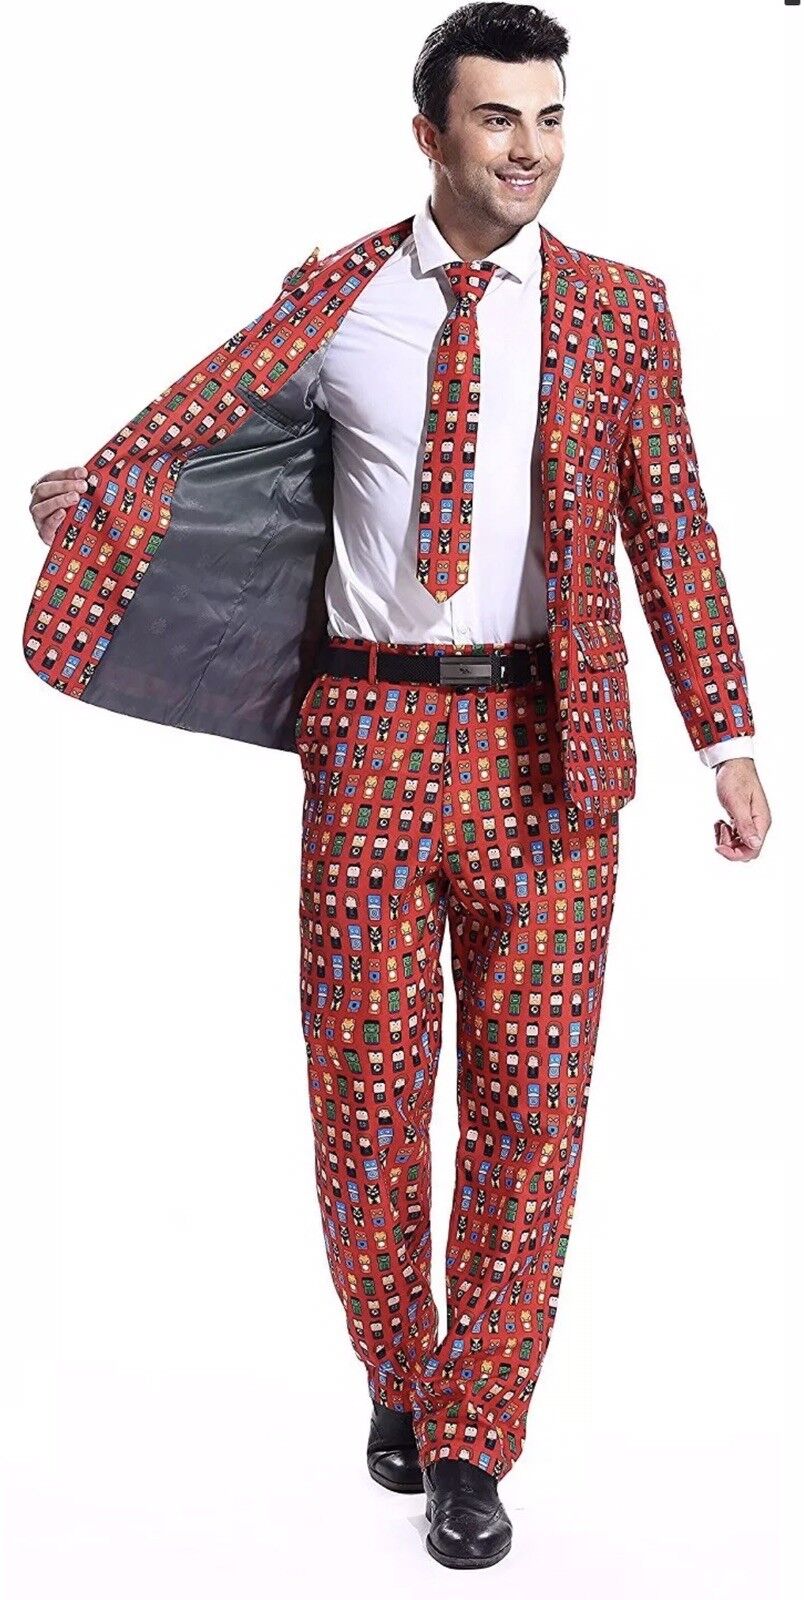 U LOOK UGLY TODAY Mens Bachelor Party Suit Funny Costume Novelty Xmas Jacket with Tie